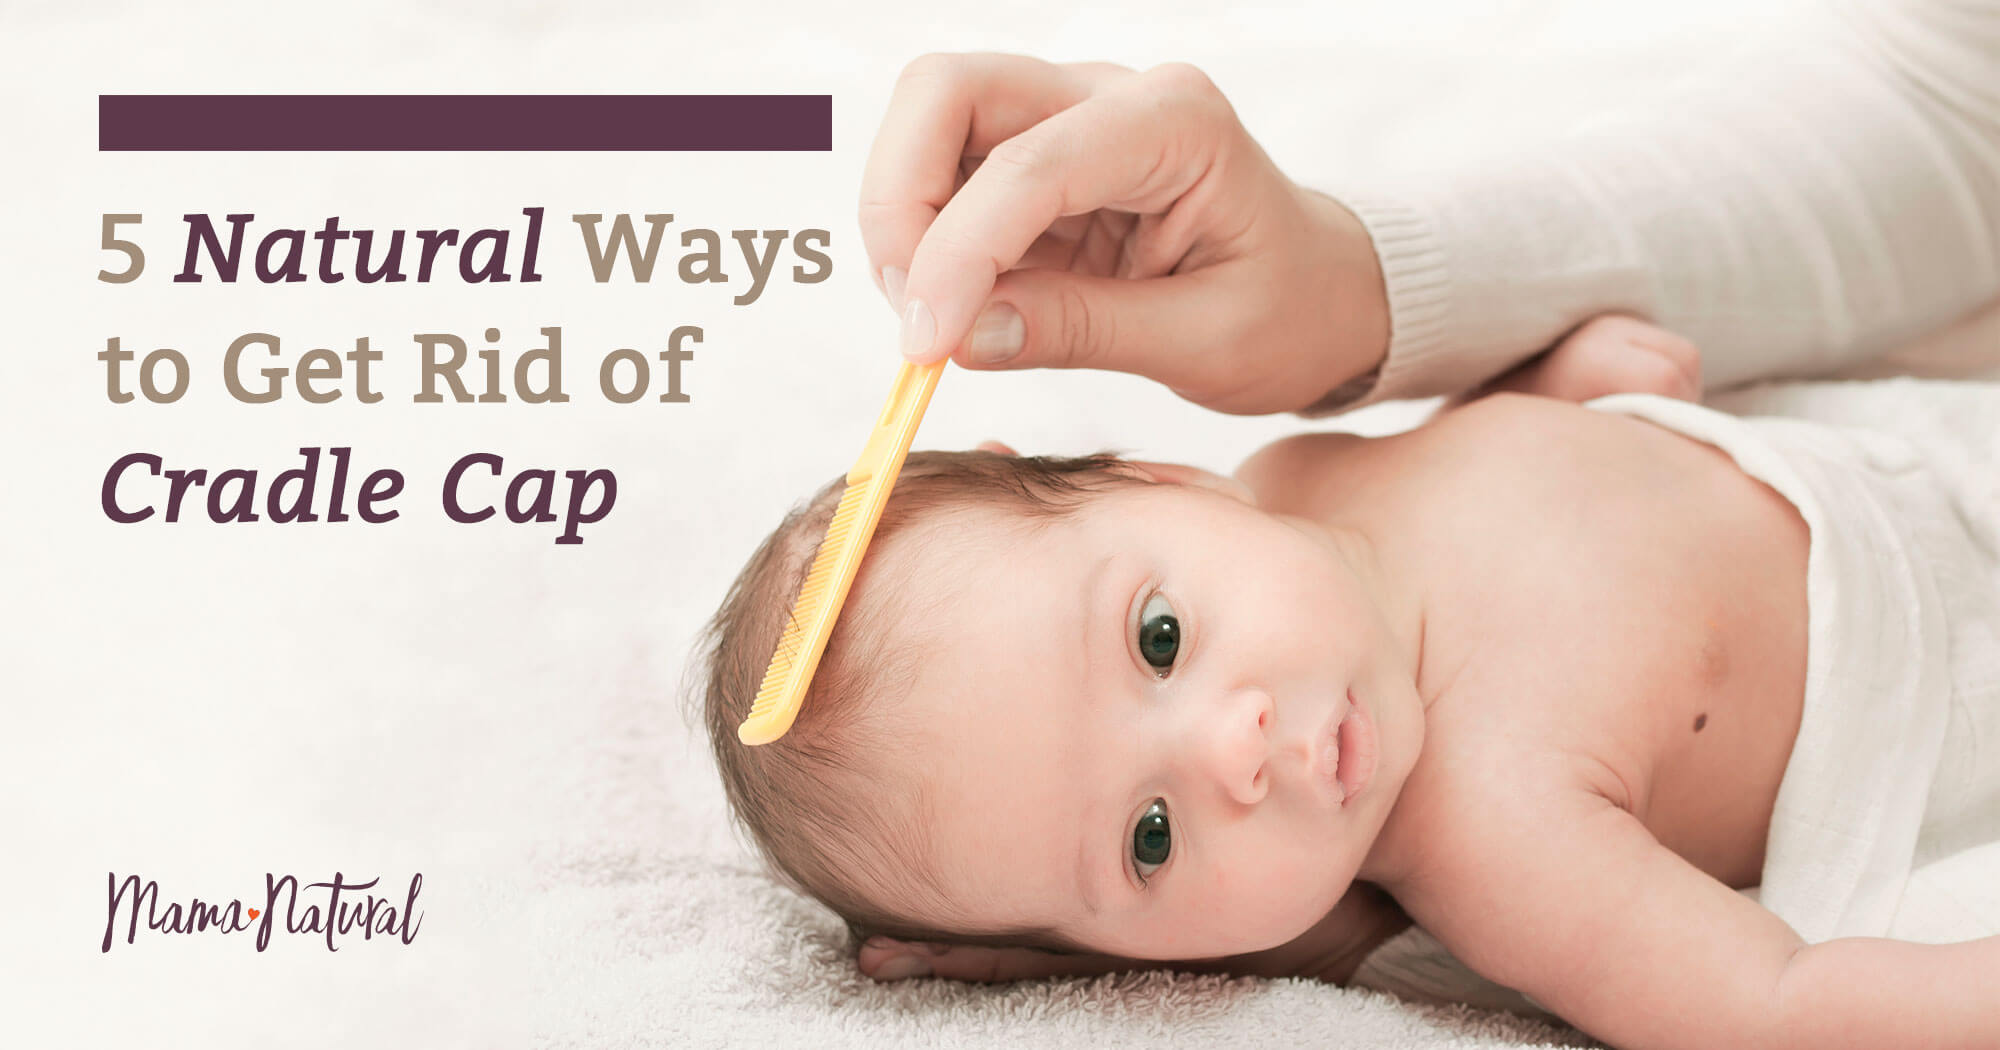 Cradle Cap: What Is It? And Do You Need 